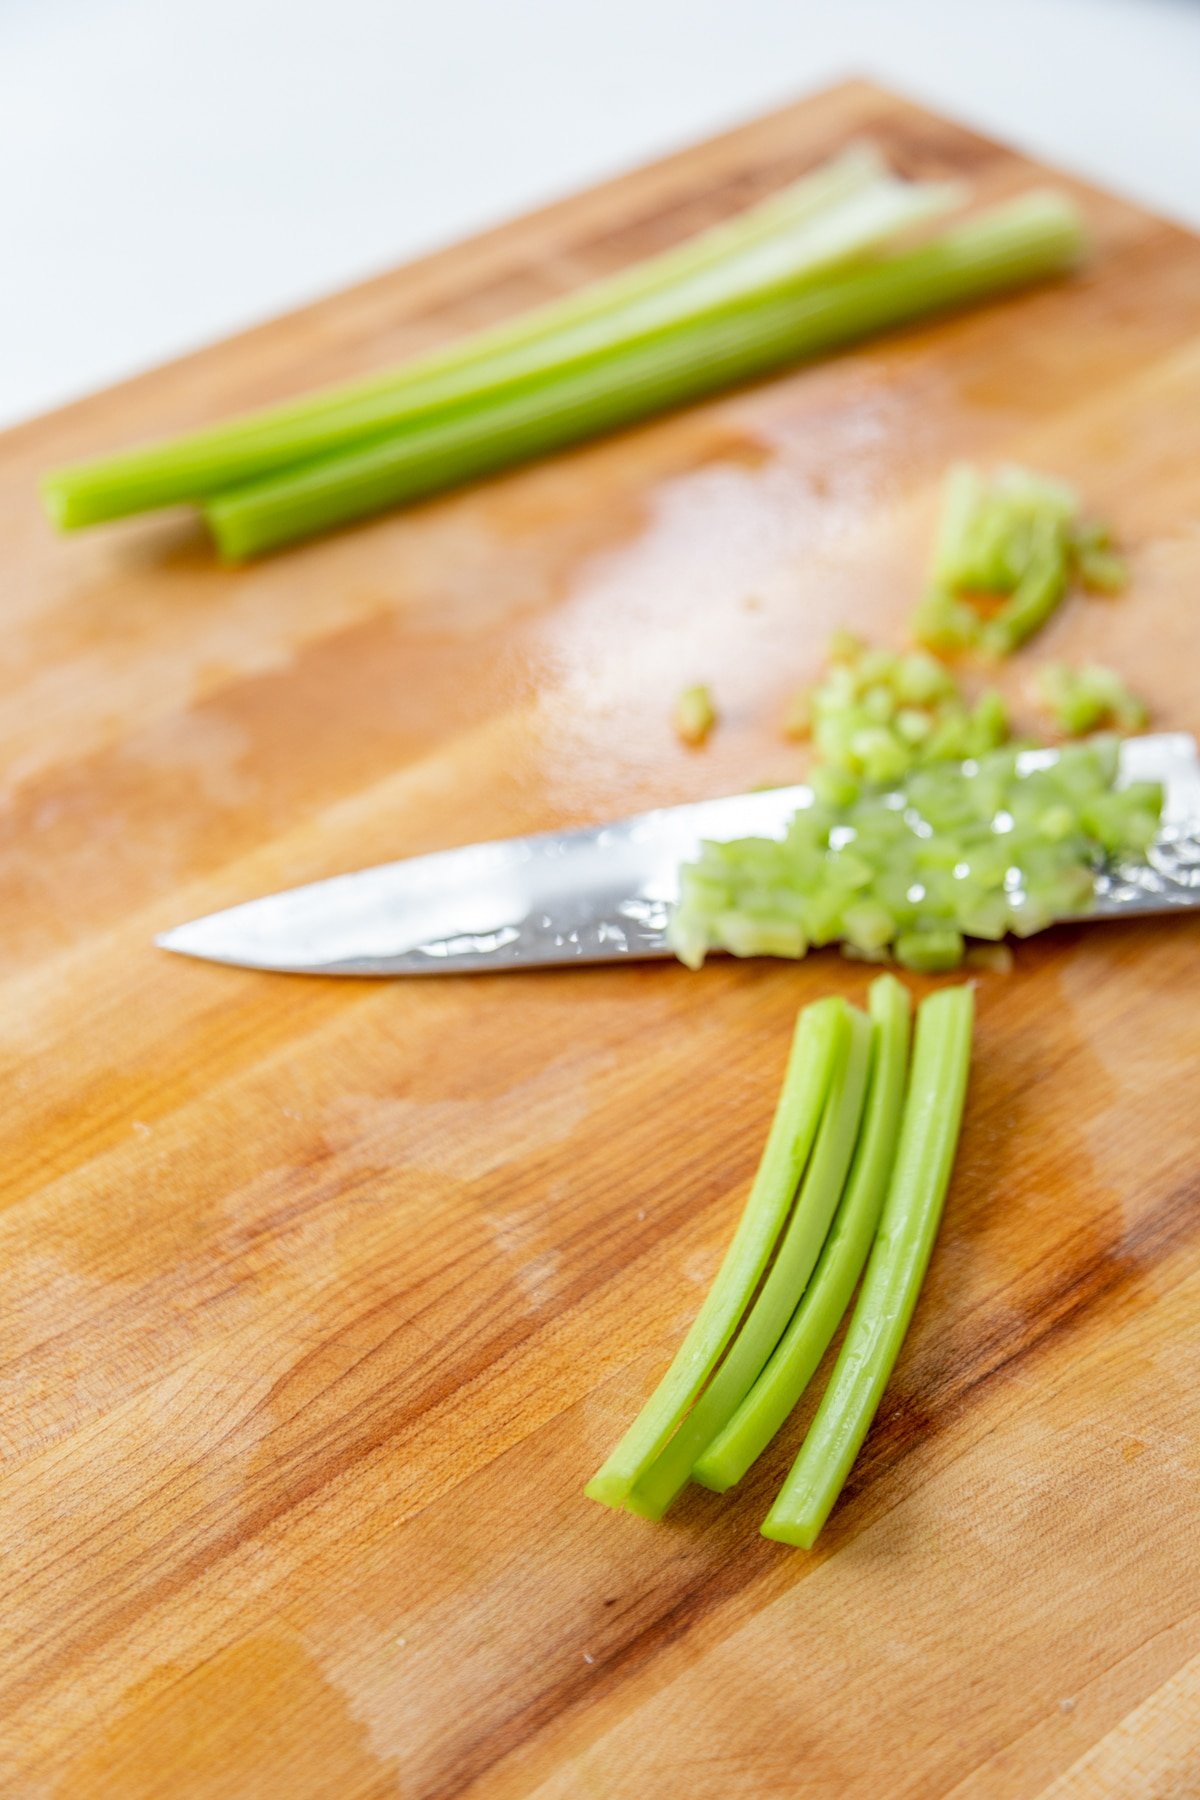 A wood cutting board with a knife, celery sticks, and chopped celery.